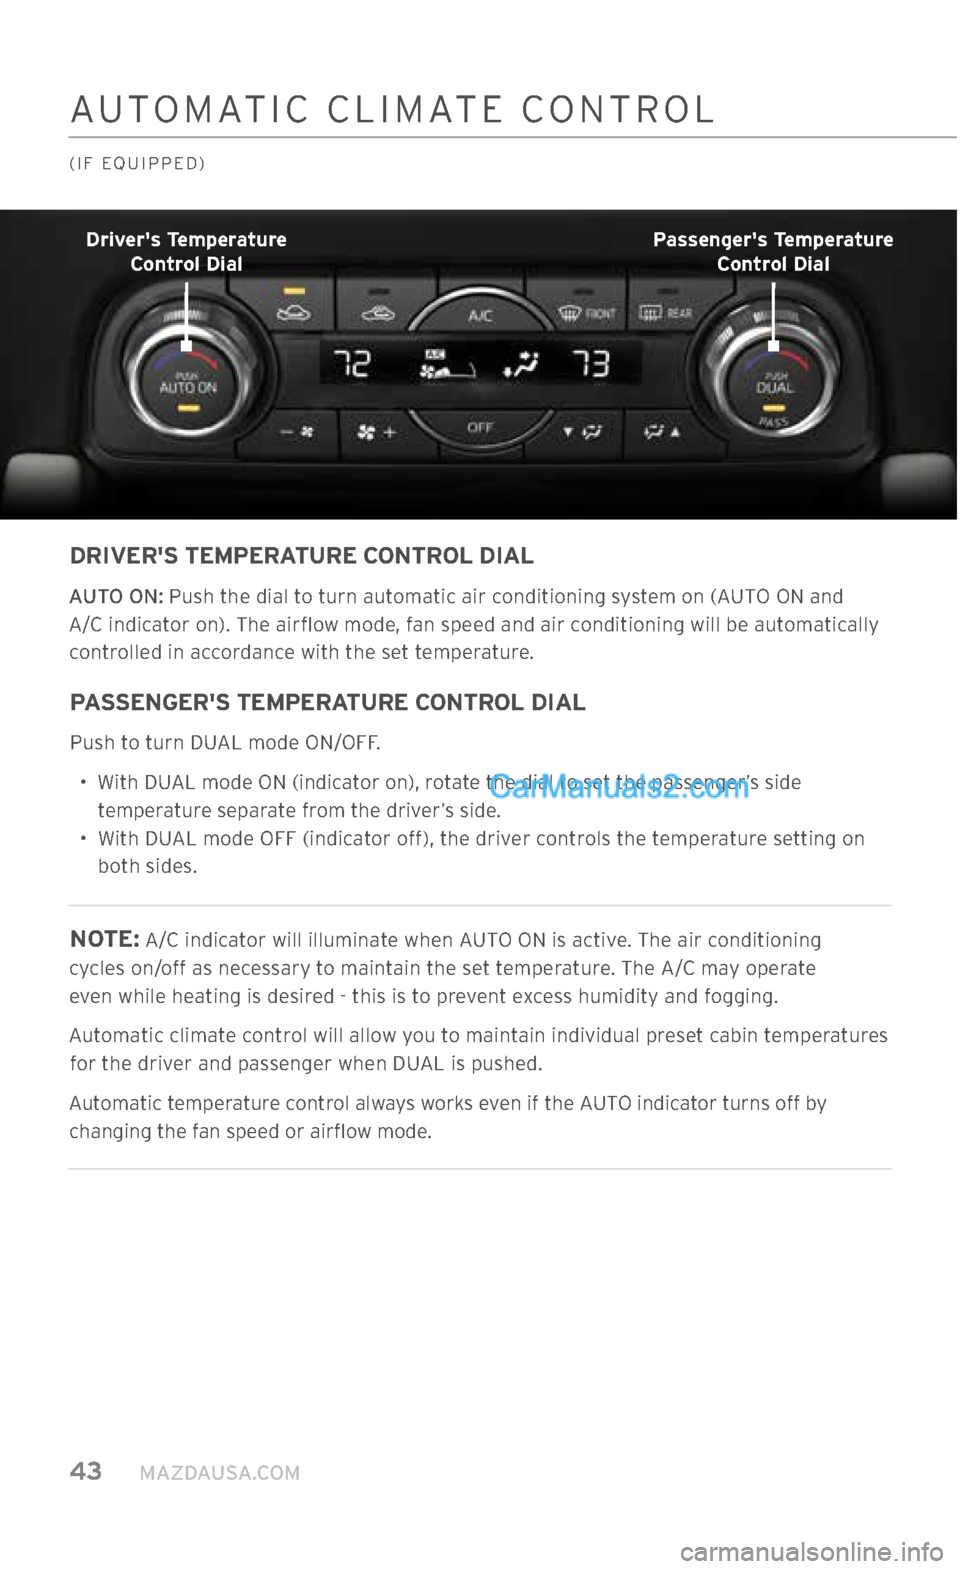 MAZDA MODEL CX-5 2017  Smart Start Guide (in English) 43     MAZDAUSA.COM
AUTOMATIC CLIMATE CONTROL
(IF EQUIPPED)
DRIVERS TEMPERATURE CONTROL DIAL
AUTO ON: Push the dial to turn automatic air conditioning system on (AUTO ON and 
A/C indicator on). The a